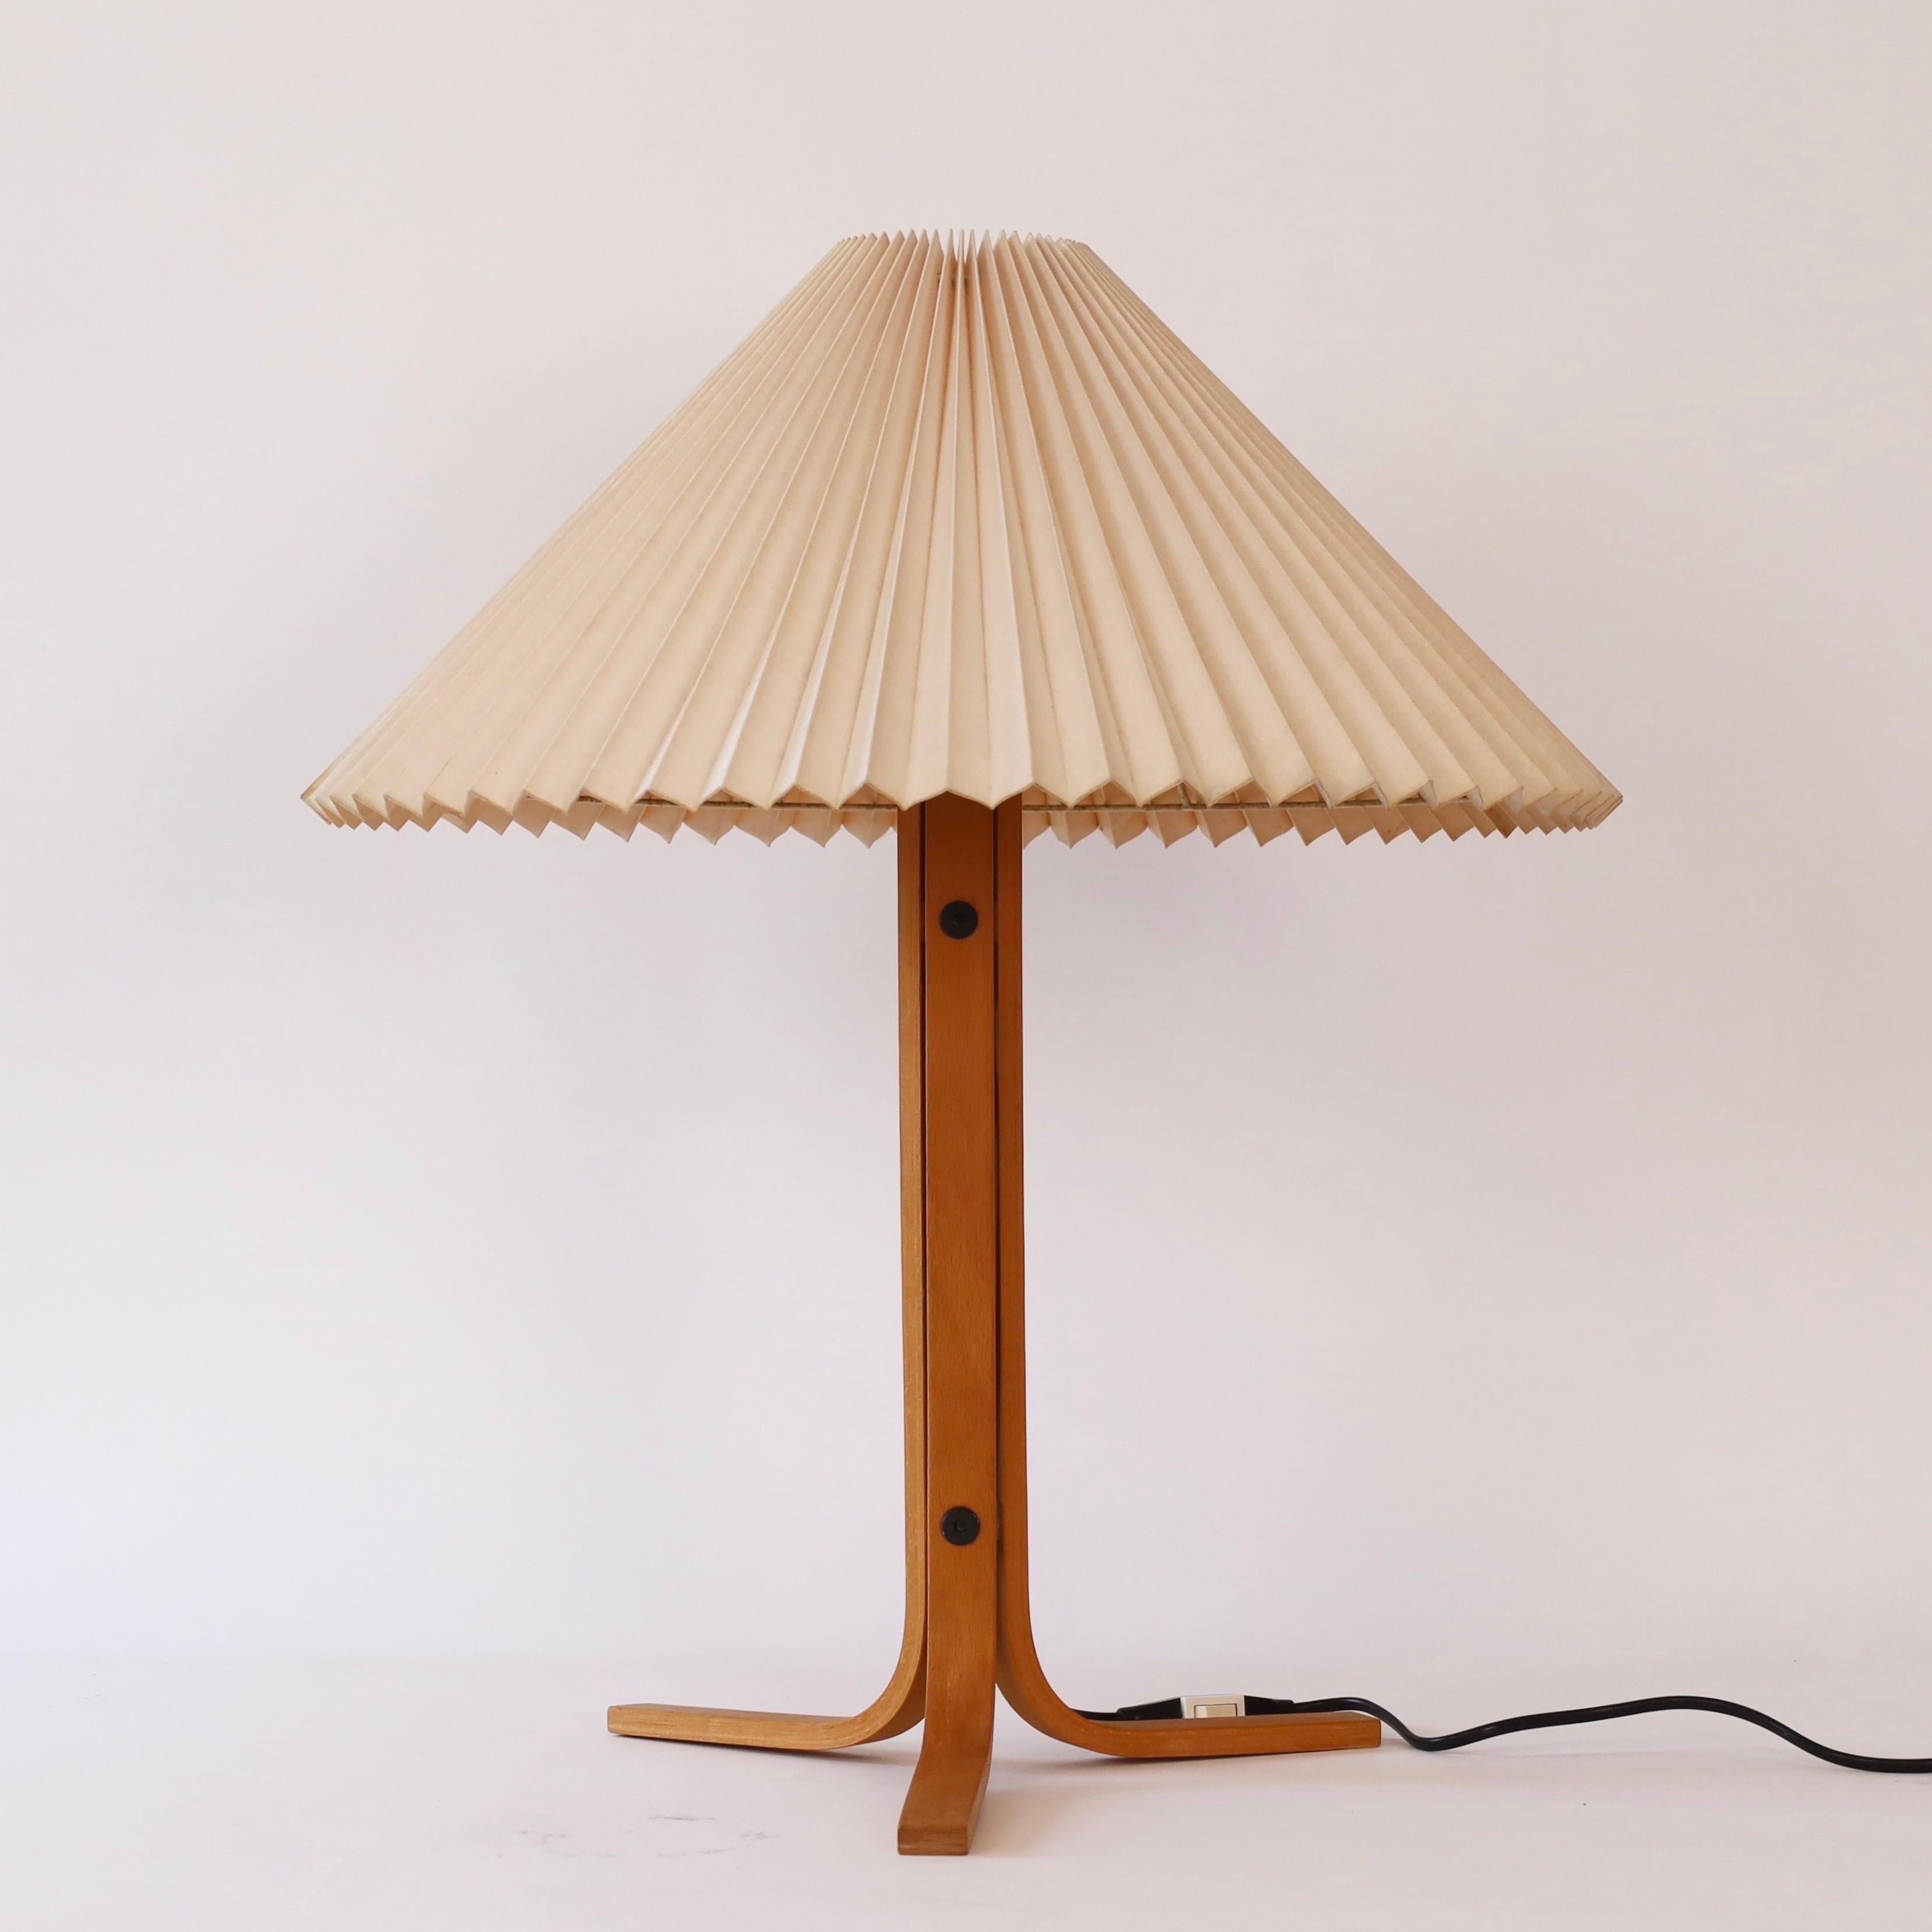 A beech wood tripod desk lamp designed by Mads Caprani in the 1970s for Caprani Light. A rare find for a beautiful home.

* A  tripod desk lamp in bend beech veneer with a pleated light beige fabric shade
* Designer: Mads Caprani
* Model: 221
*